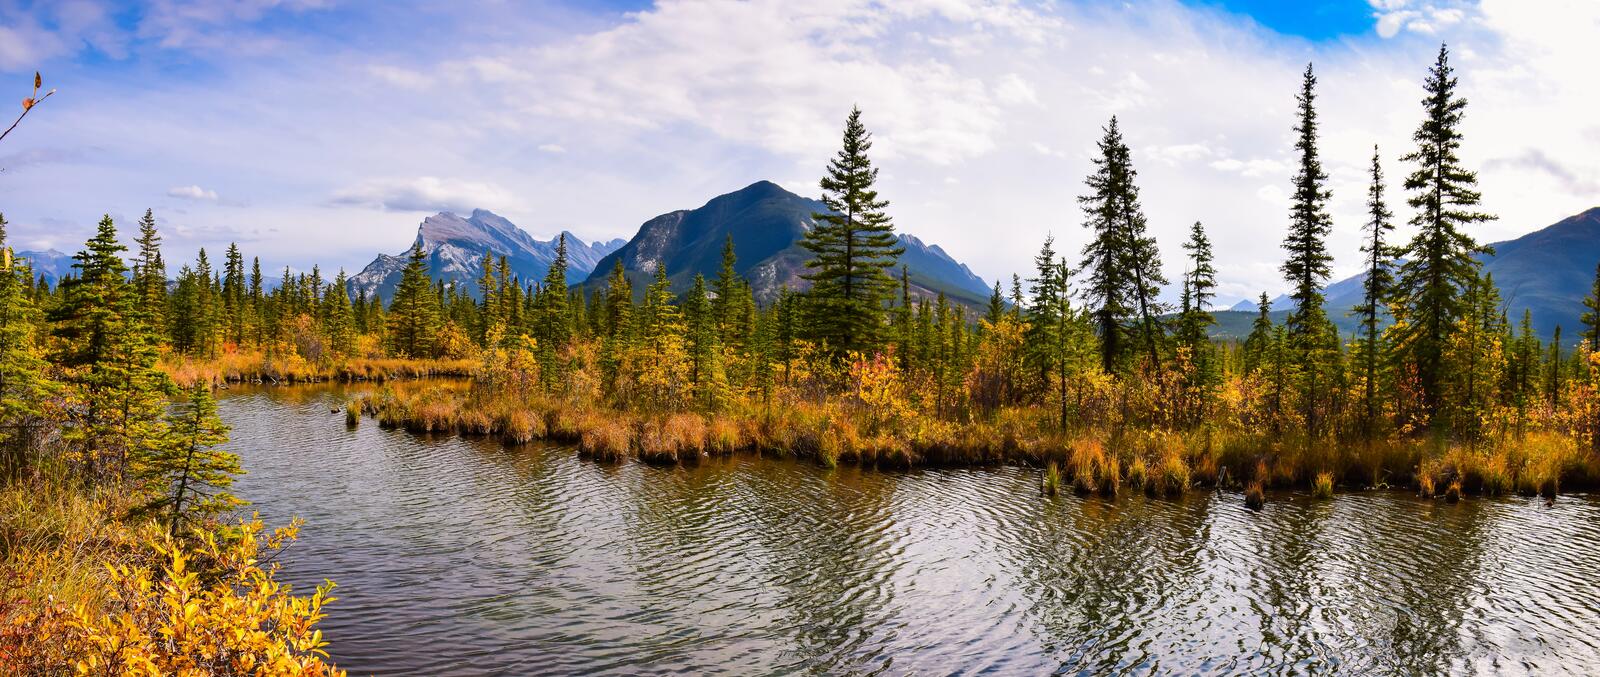 Wallpapers Banff National Park Canada mountains on the desktop